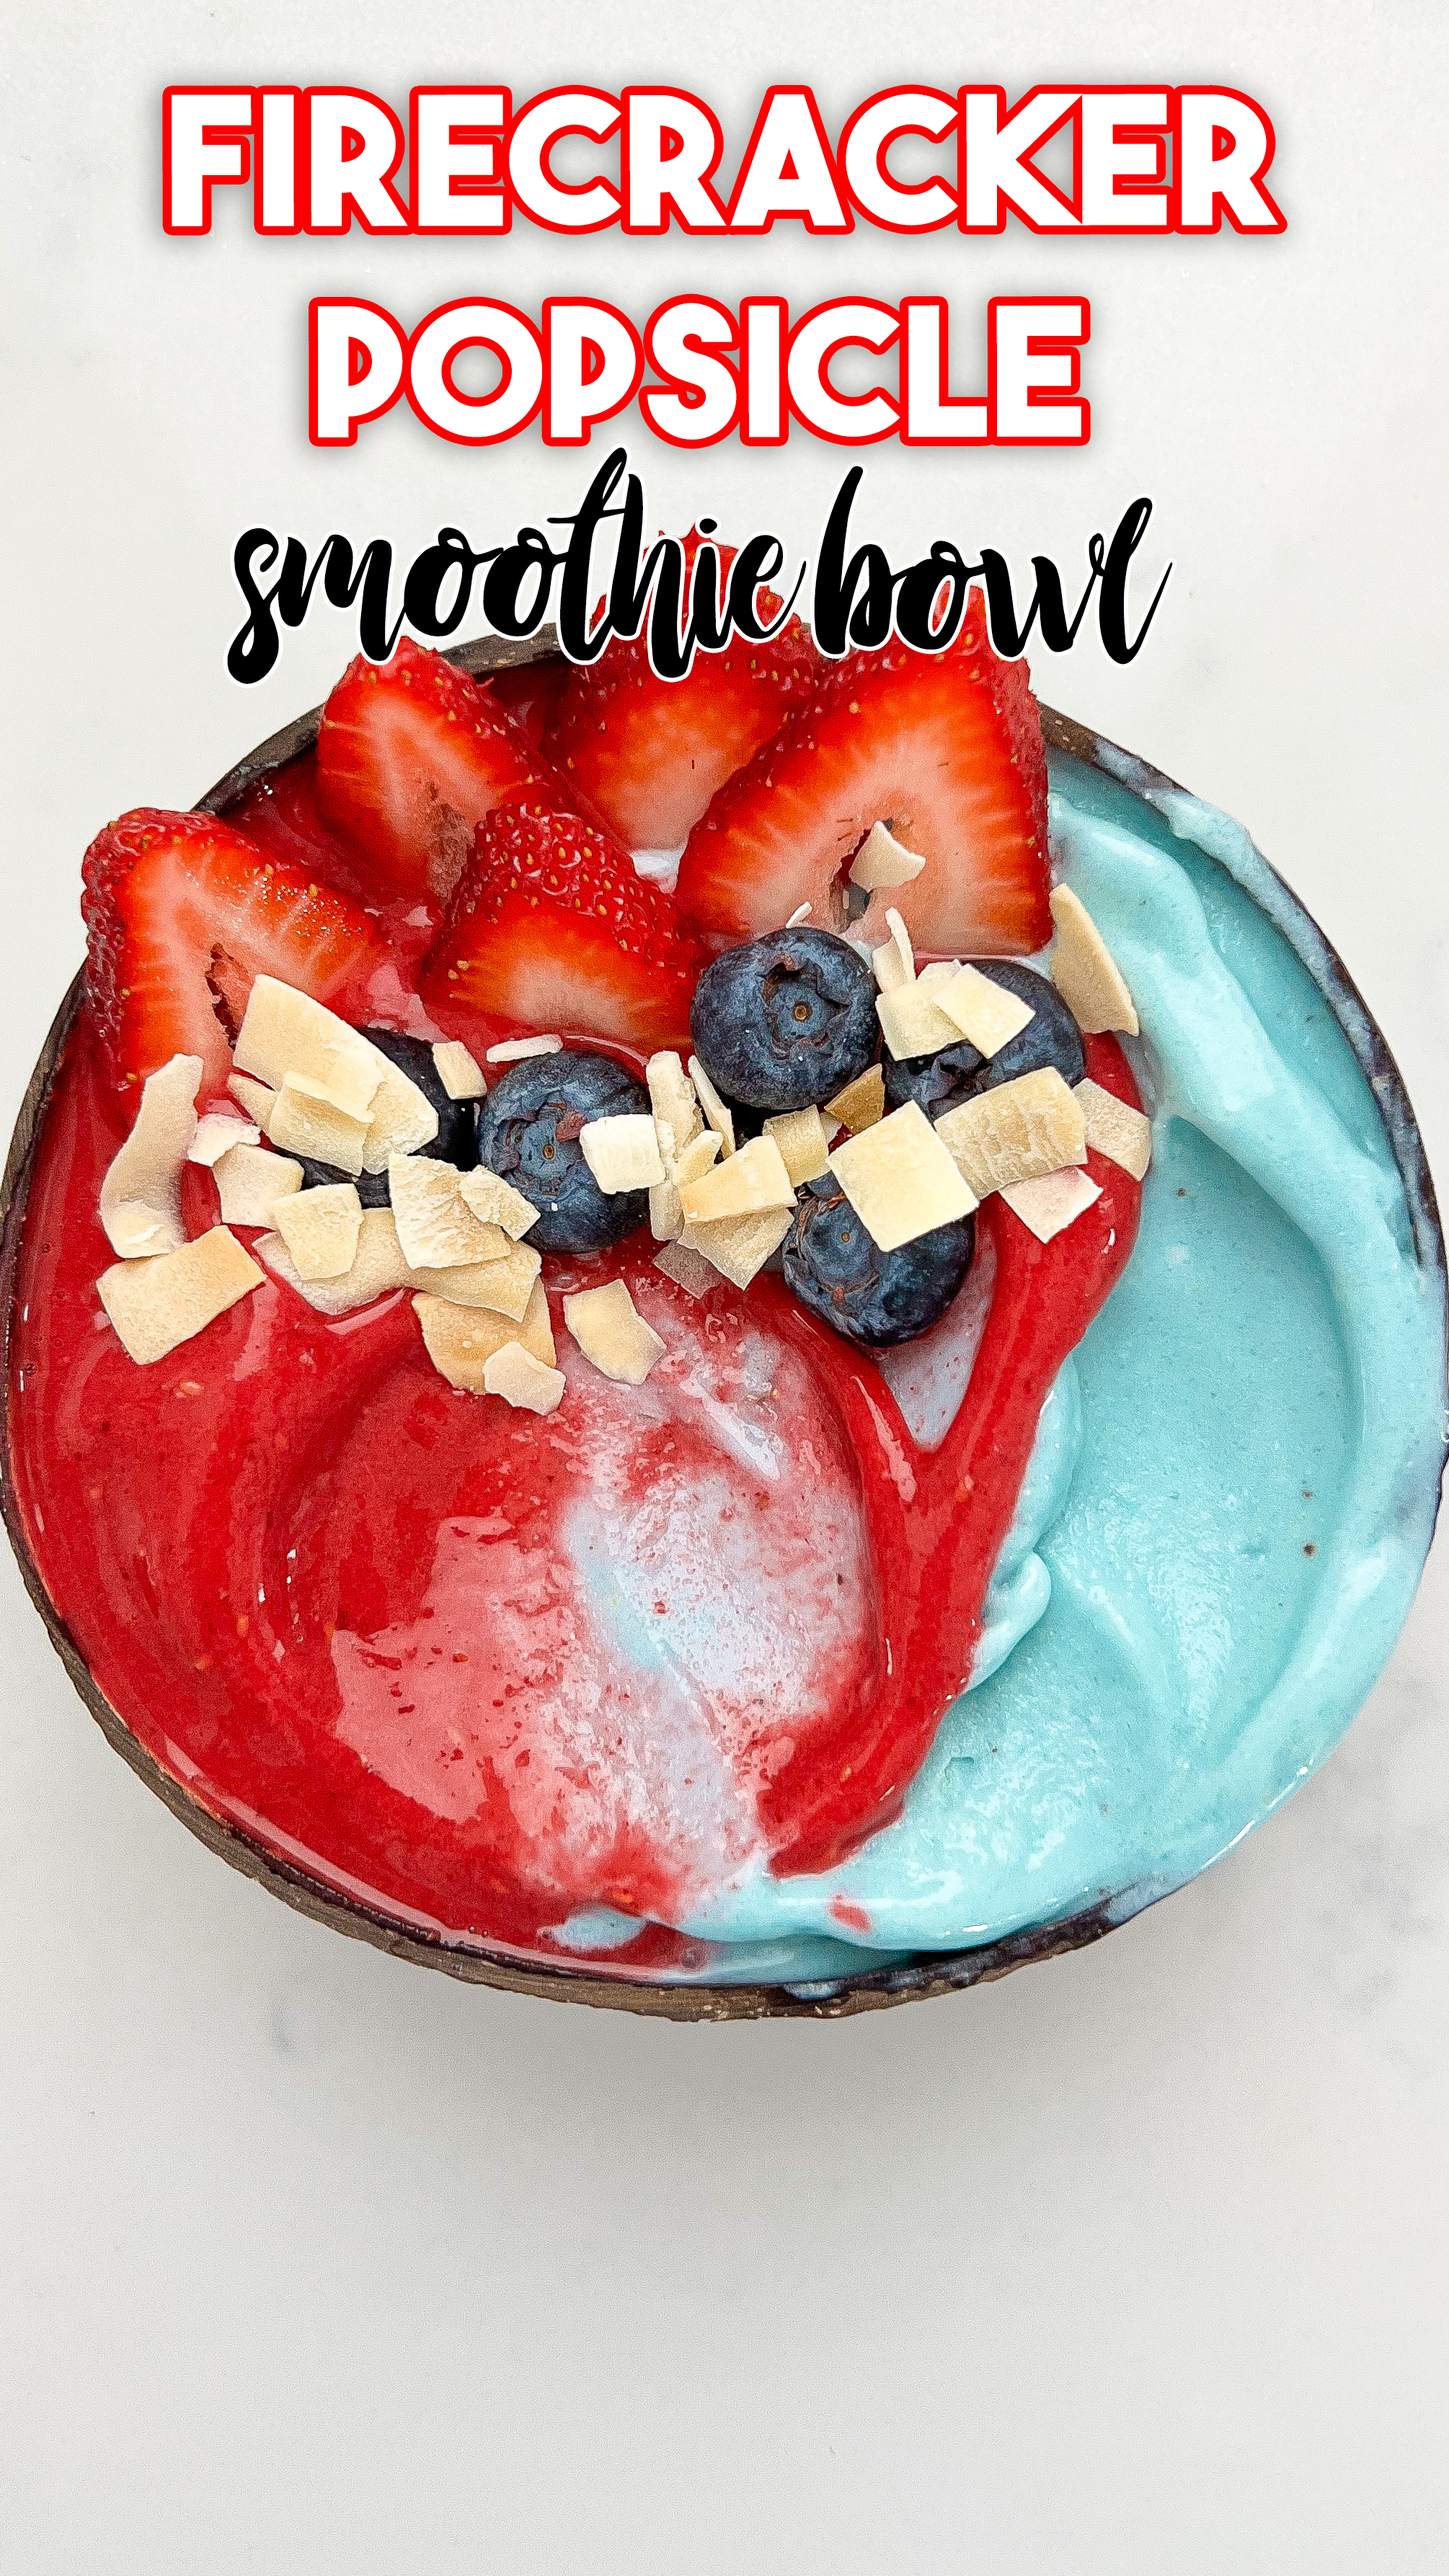 Firecracker Popsicle Smoothie Bowl Recipe